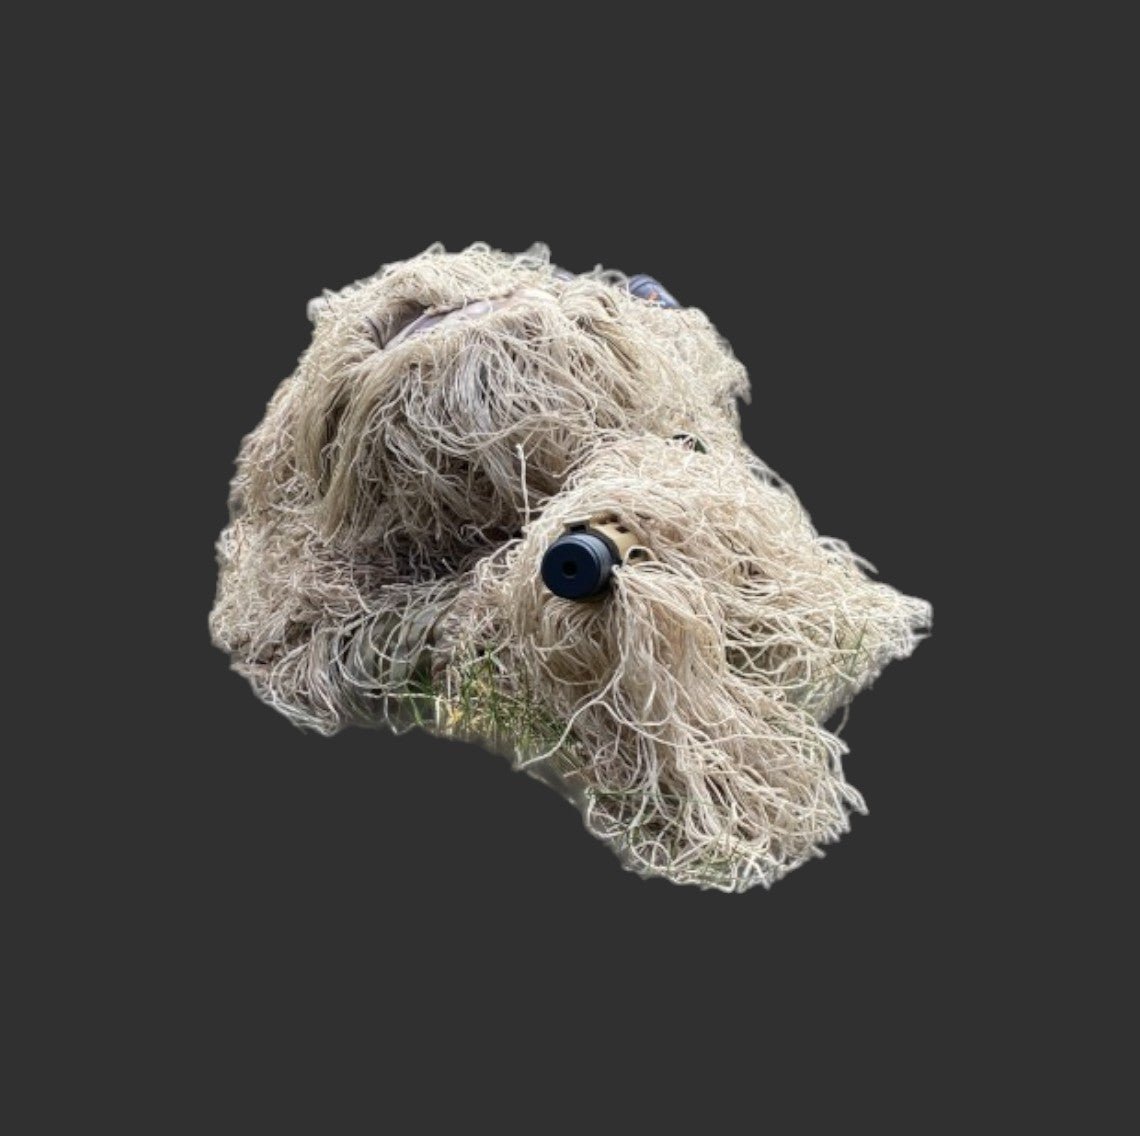 A tan dog with long, curly fur, partially covered by a BlasterMasters StealthGuard Gun Cover designed for camouflage, peeks out from under its coat with a black nose and dark eyes.